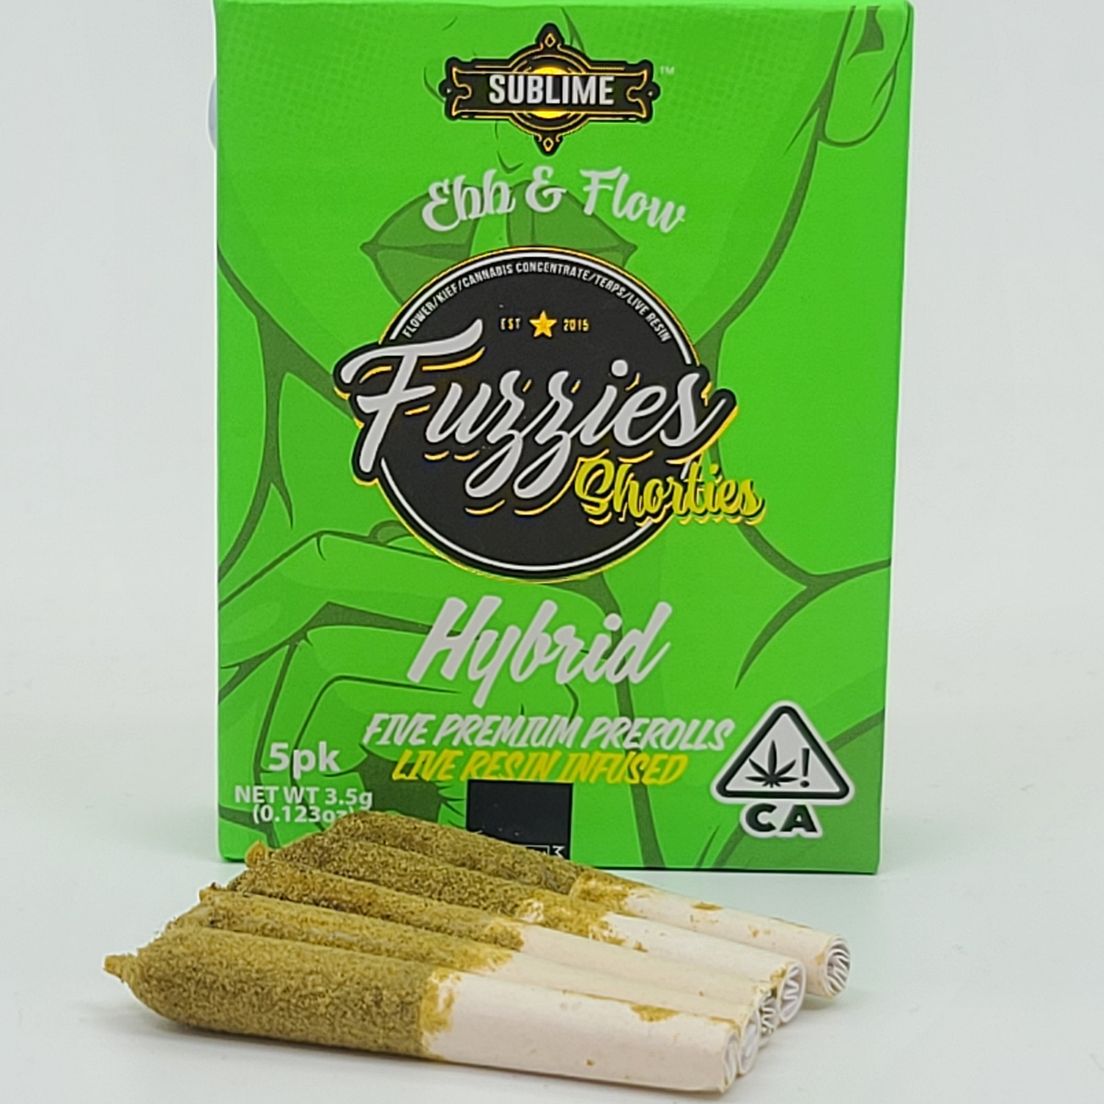 Hybrid 5pk - 3.5g Live Resin Infused Pre-rolls (THC 43% ) by Sublime